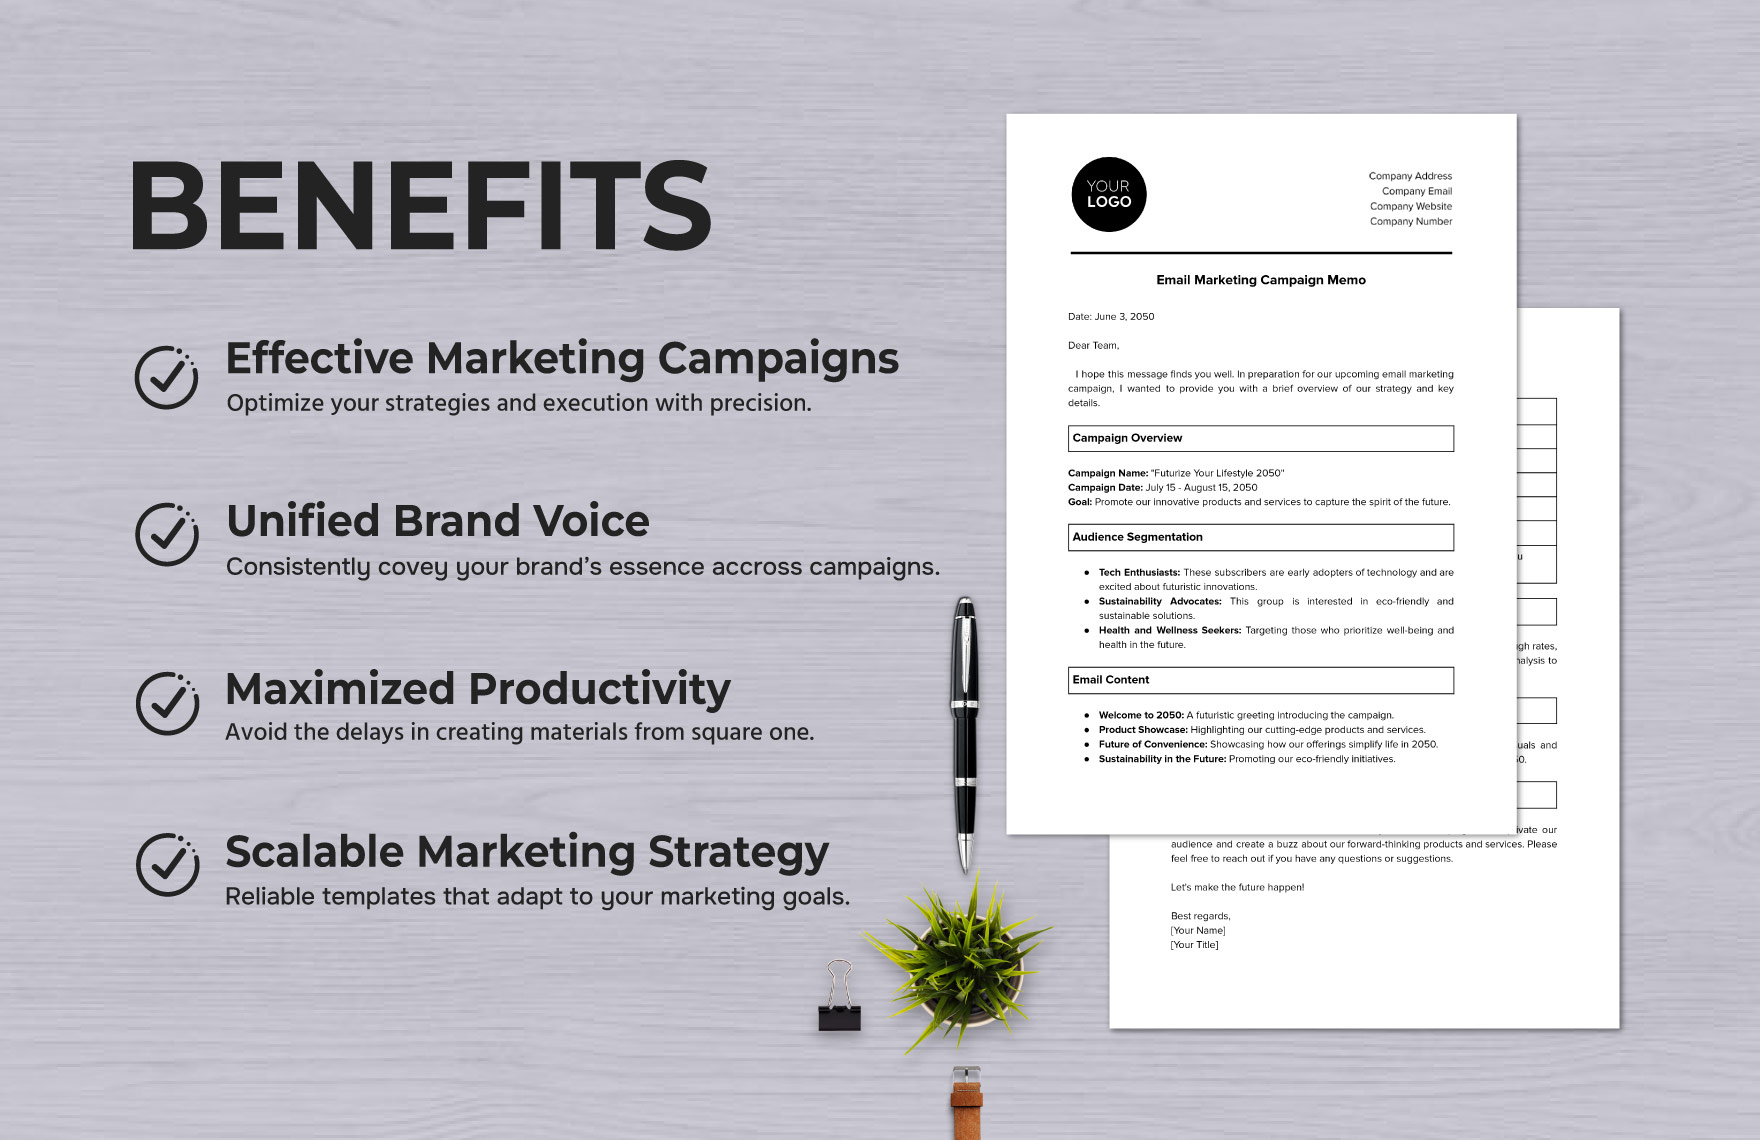 Email Marketing Campaign Memo Template